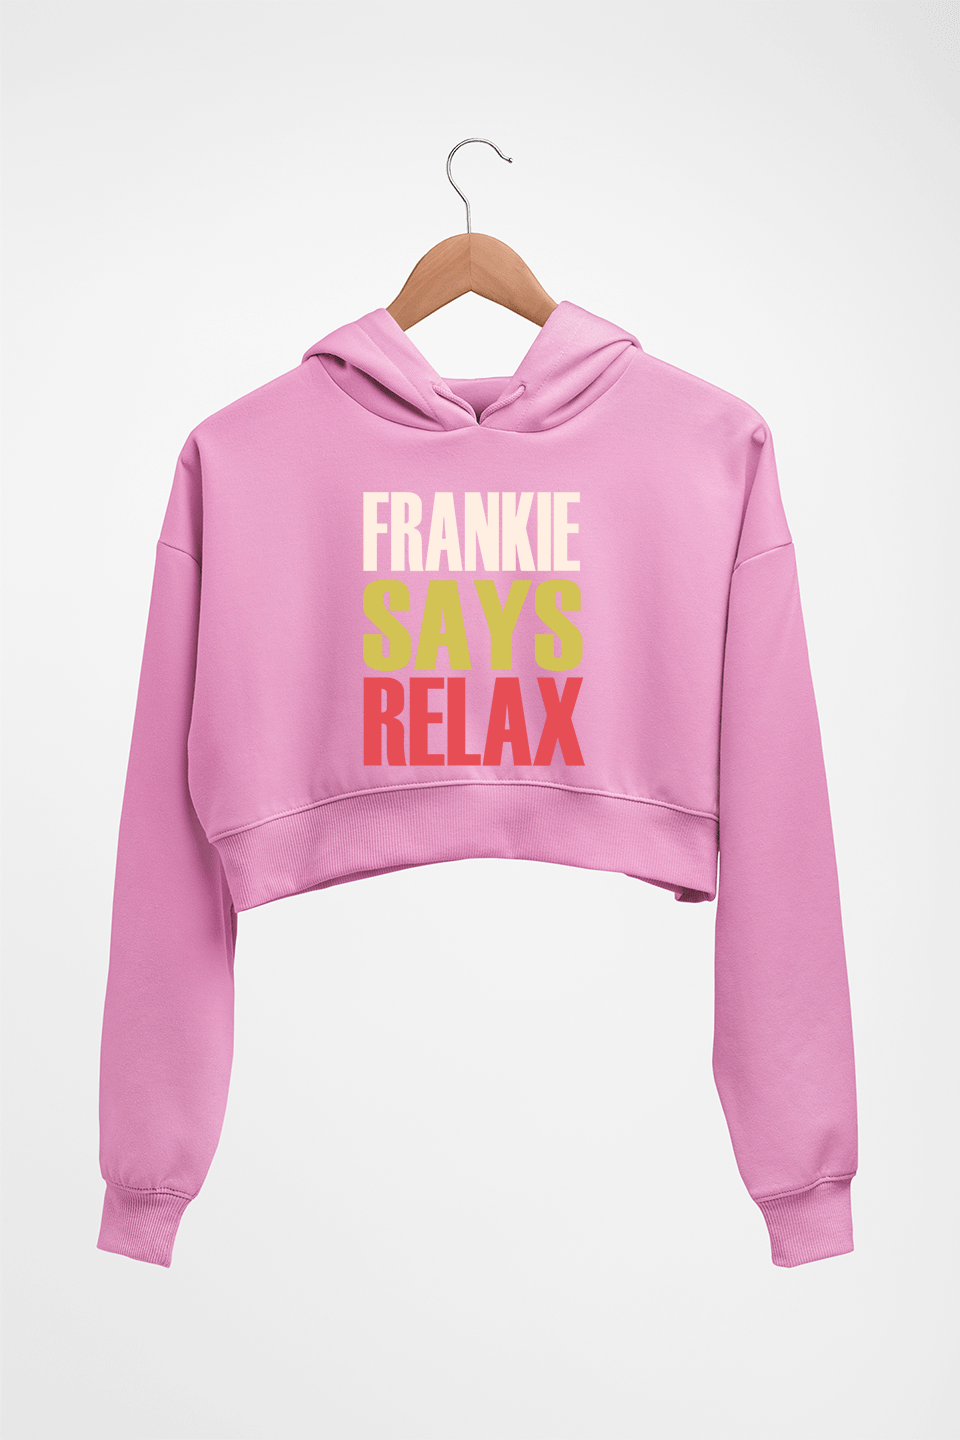 Frankie Says Relax Friends Crop HOODIE FOR WOMEN